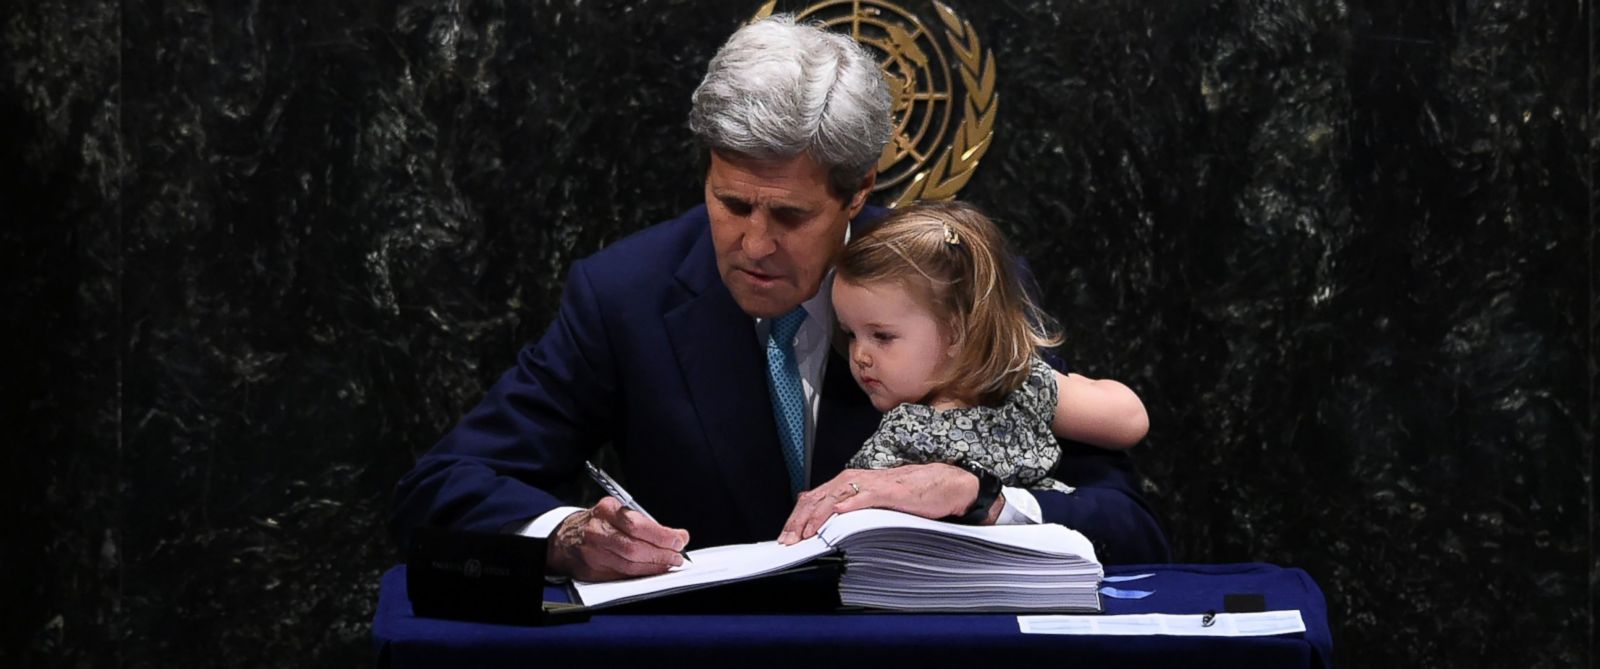 PHOTO: Secretary of State John Kerry signs the Paris Agreement at the United Nations General Assembly Hall while holding his granddaughter, Isabelle Dobbs-Higginson, April 22, 2016, in New York.